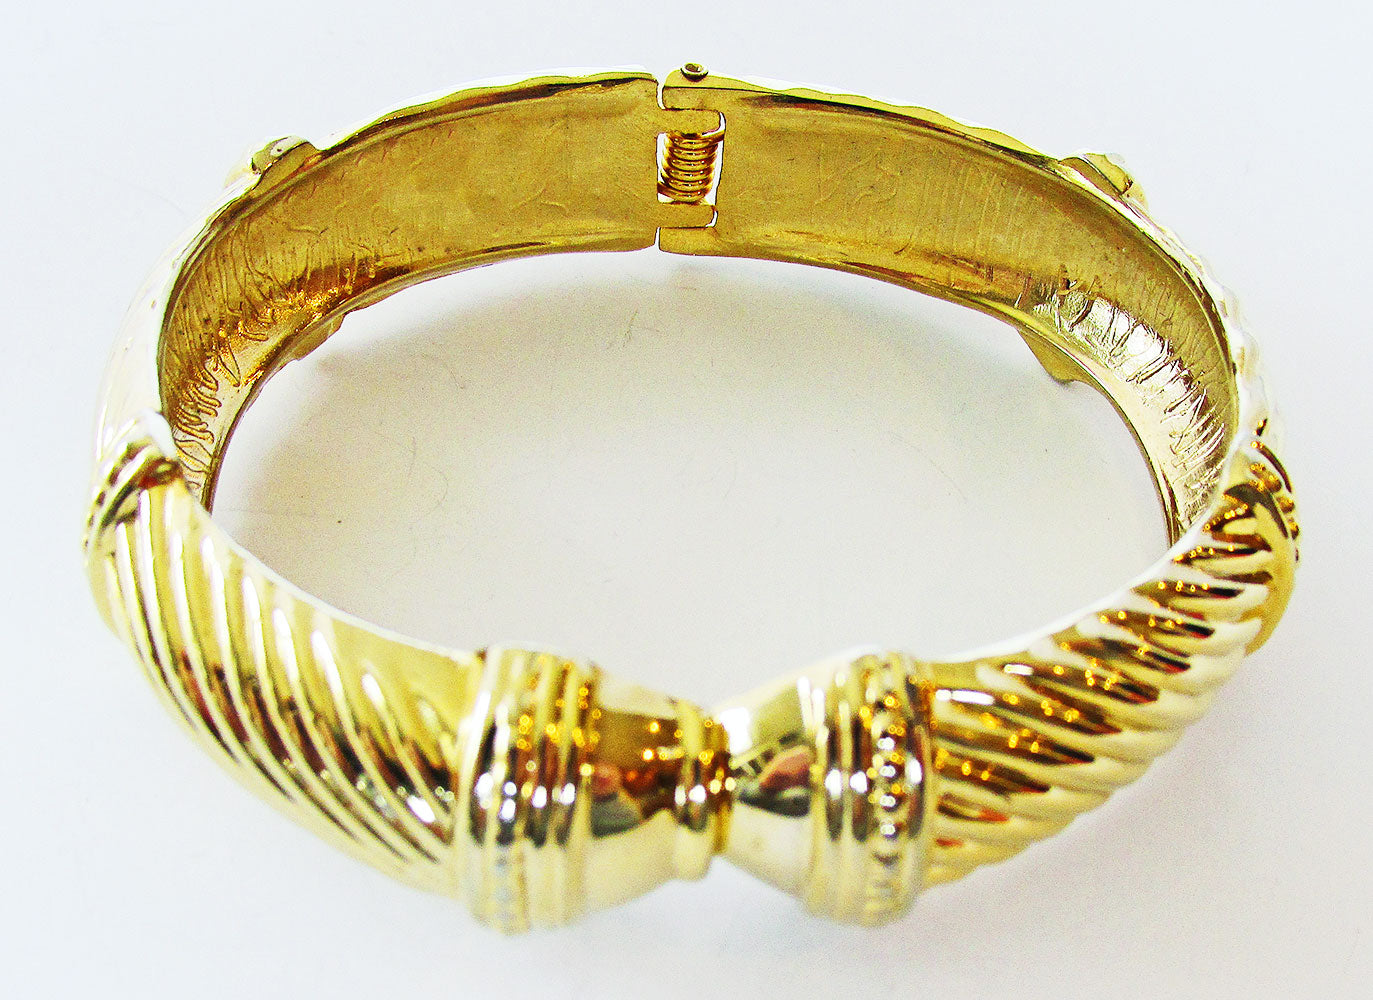 Vintage 1960s Mid-Century Contemporary Style Gold Cuff Bracelet - Front